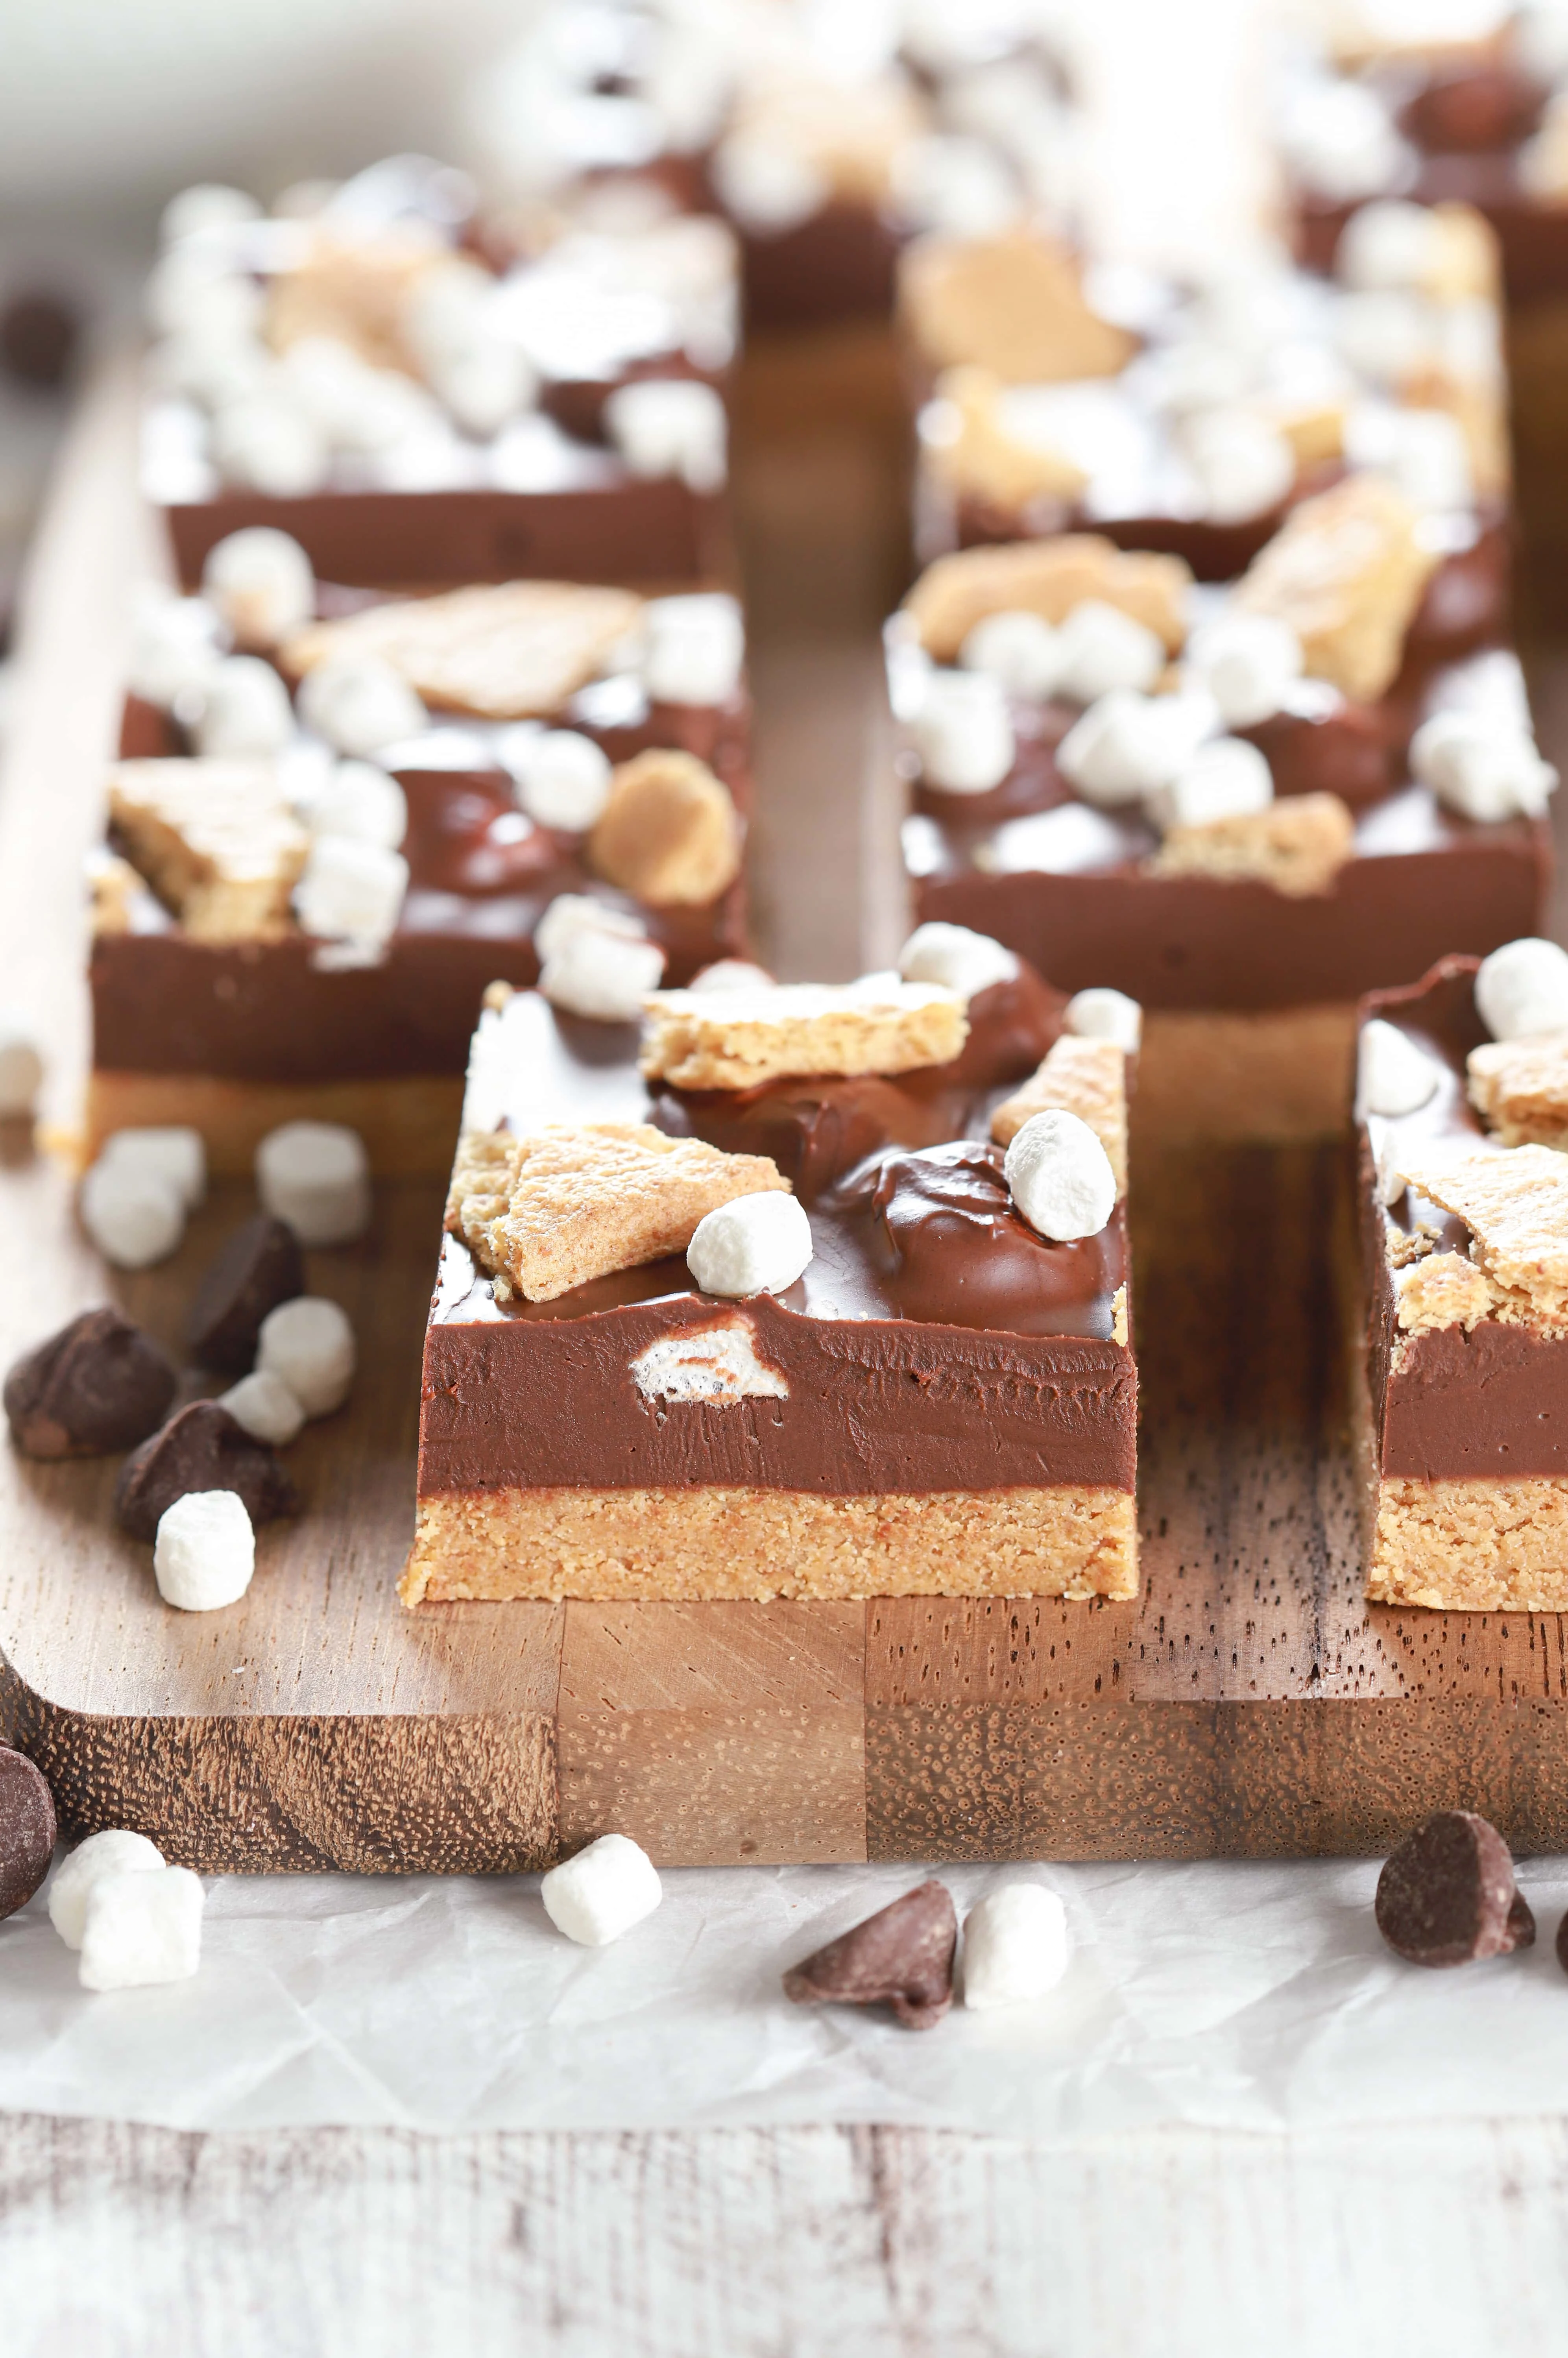 Up close side view of a no bake peanut butter smores bar with more bars in the background.